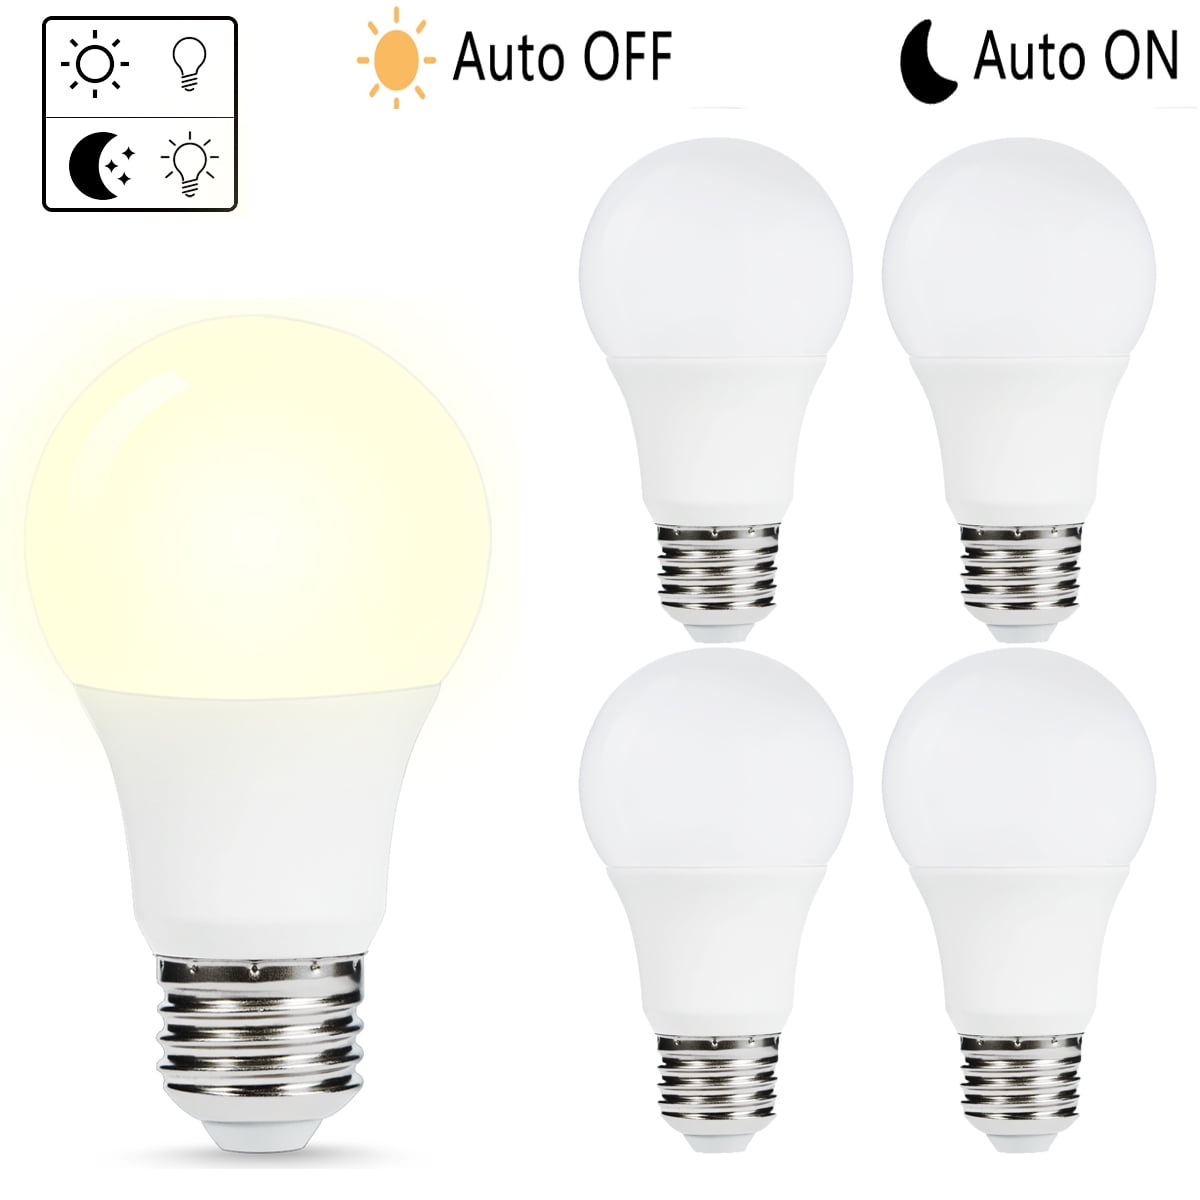 Camping Outside Lighting Acuvar 9W E26 LED Dusk to Dawn Light Bulb with Auto On and Off Function for Home